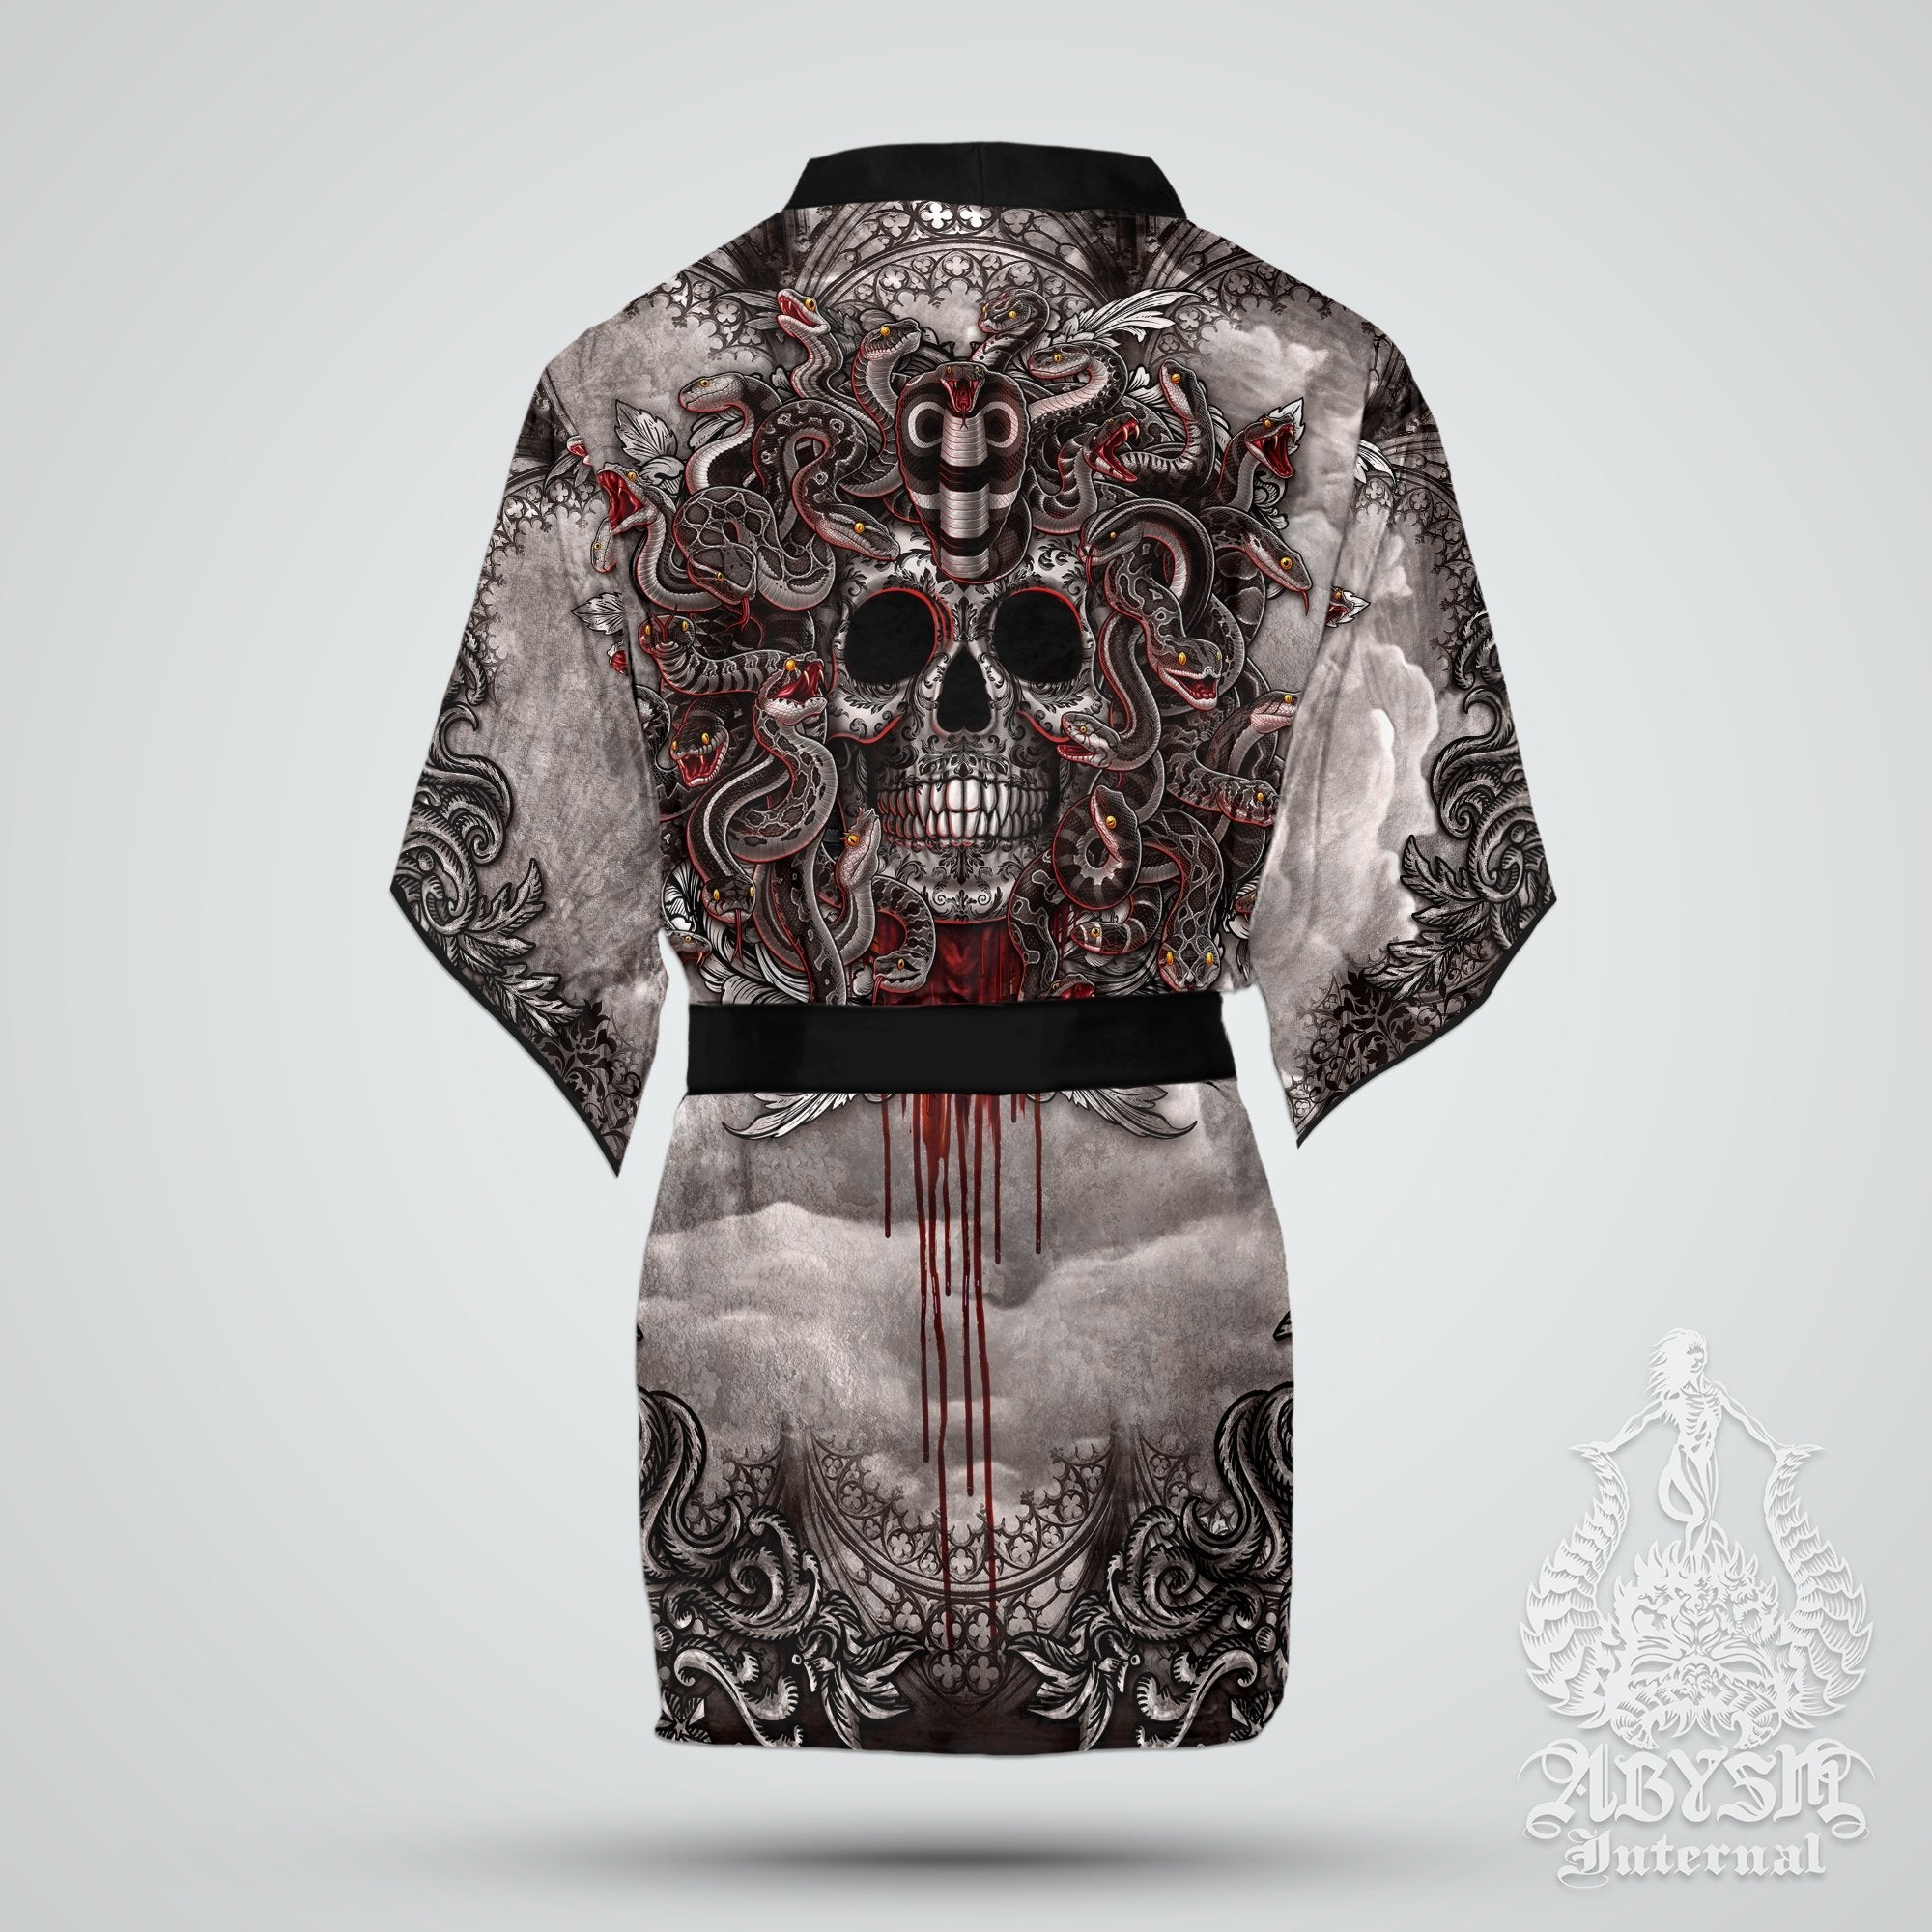 Medusa Skull Cover Up, Beach Outfit, Party Kimono, Summer Festival Robe, Goth Indie and Alternative Clothing, Unisex - Gothic Horror Grey - Abysm Internal